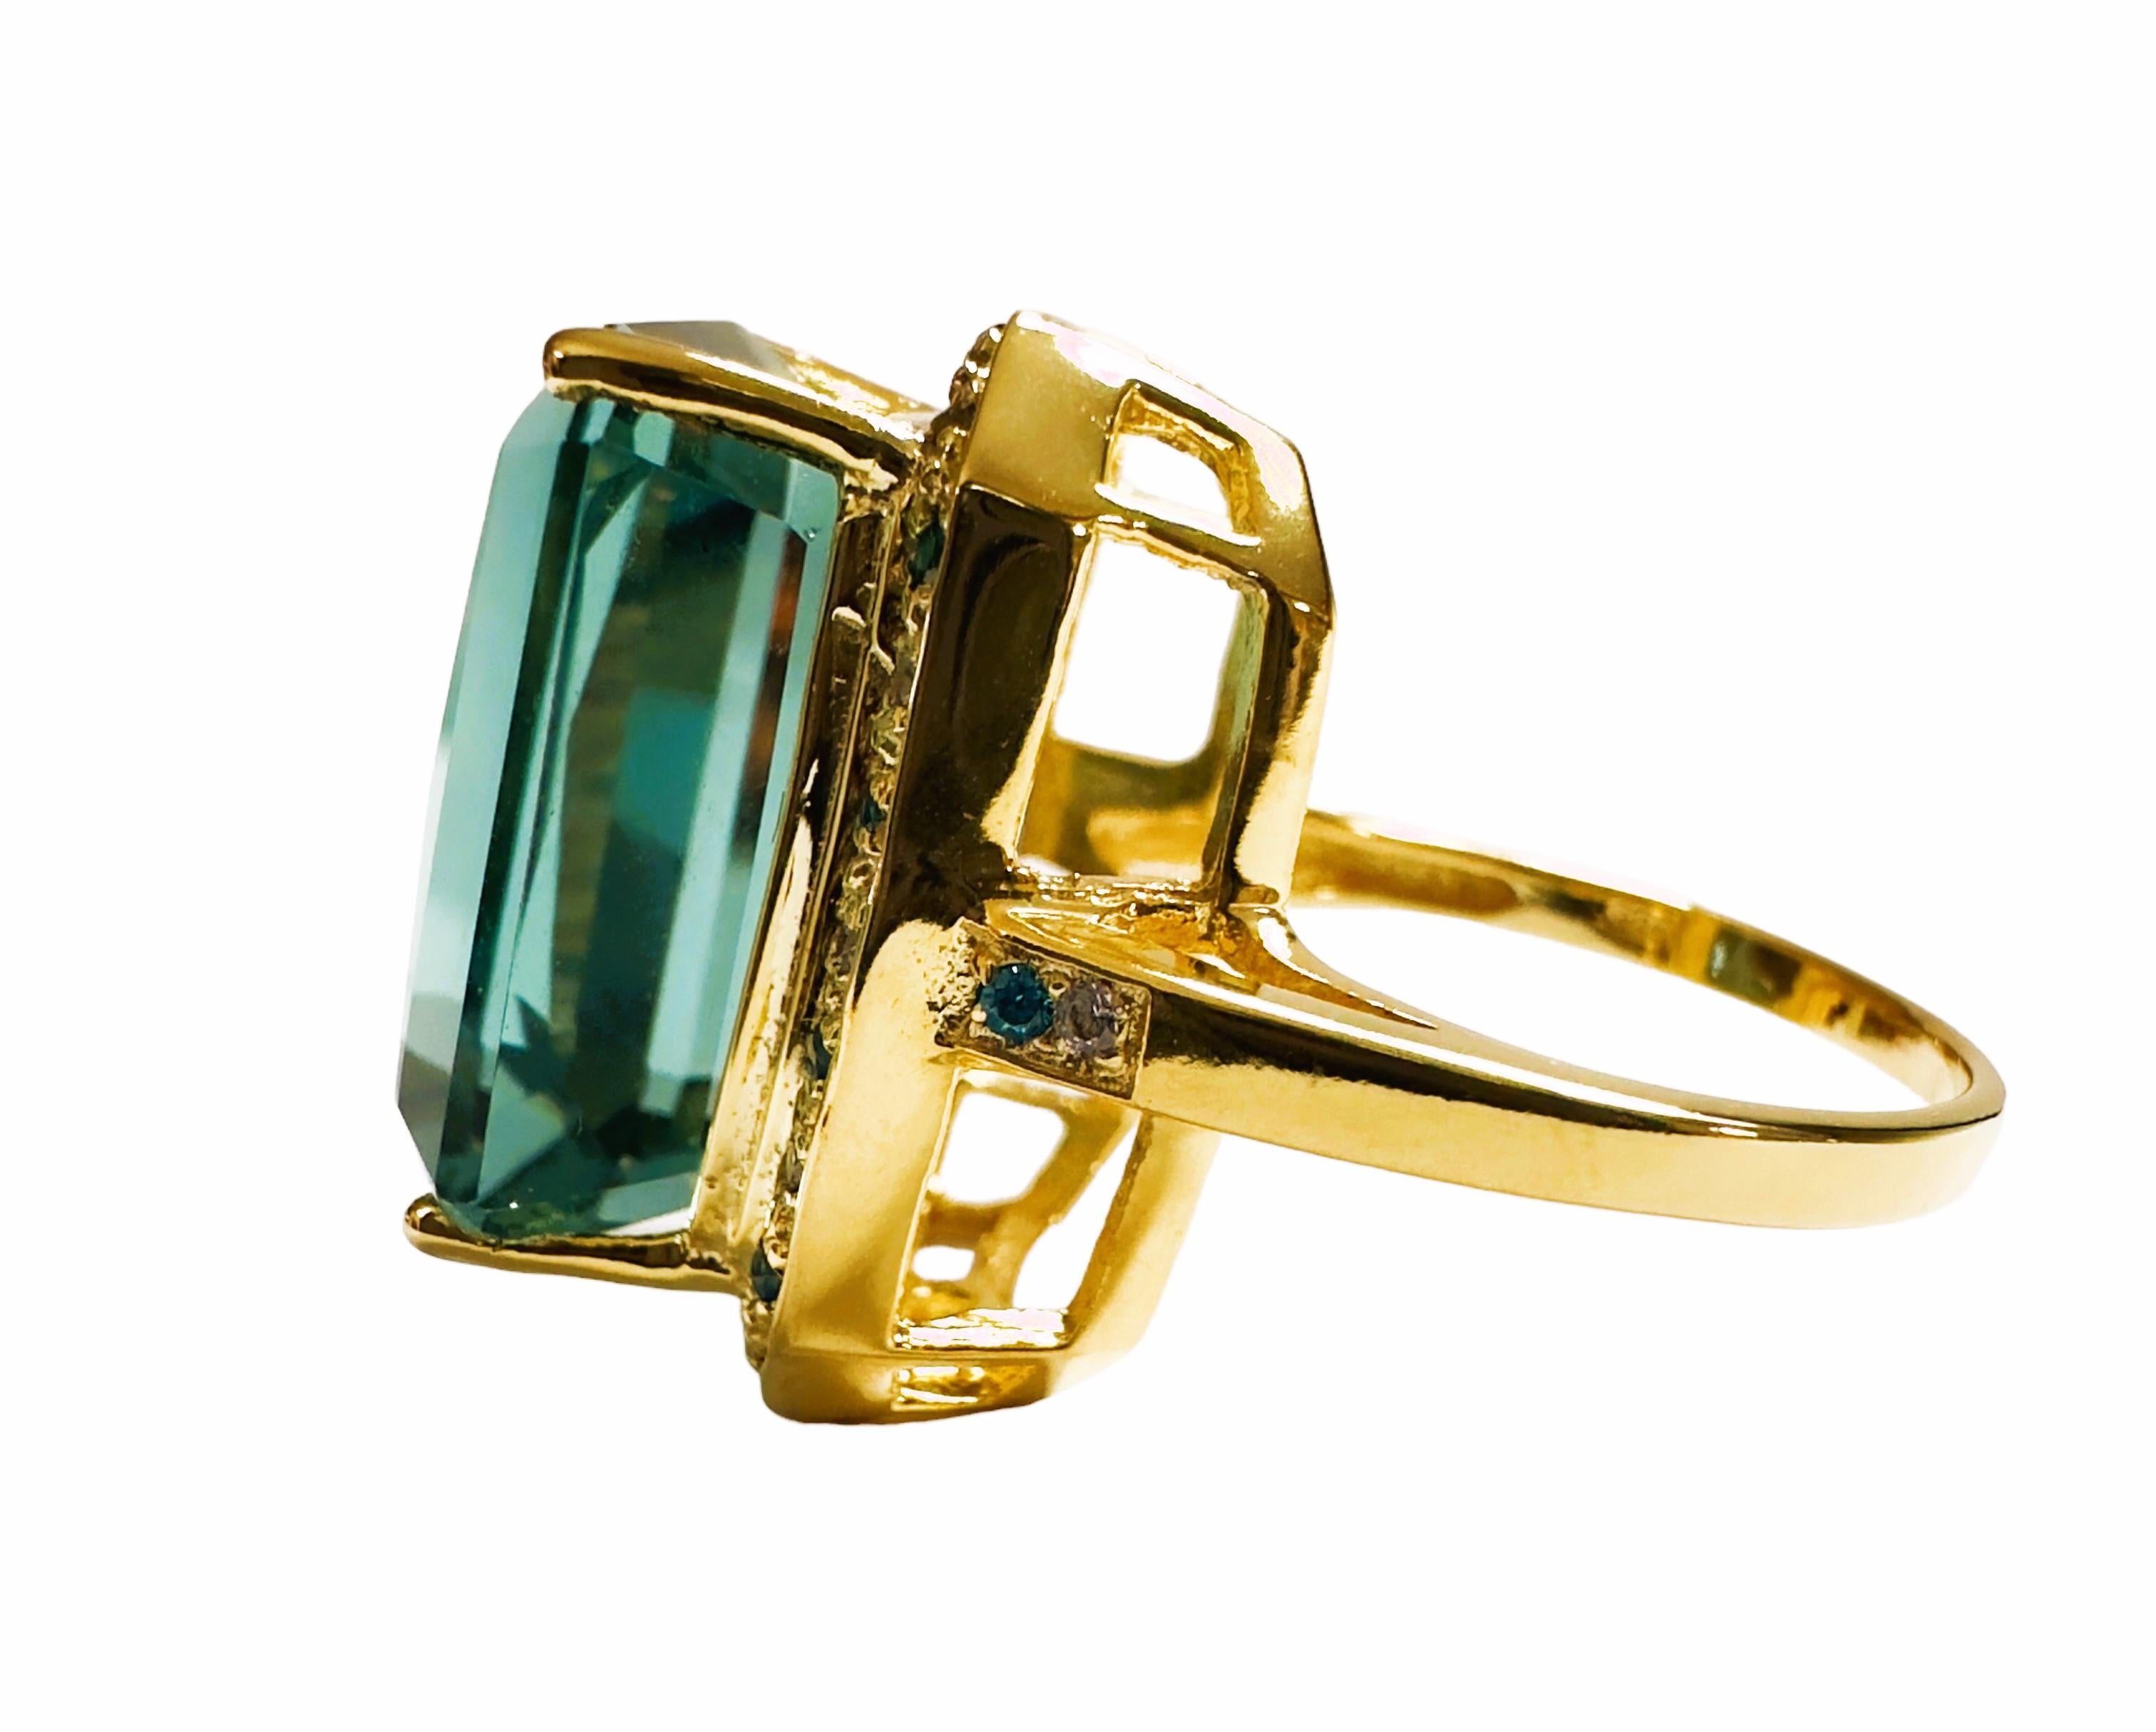 What a beautiful ring!  The cut of this stone is just spectacular!  The ring is a size 6.25. This stone is from the Philippines. It is a beautiful Emerald cut stone and is 25 cts.  It's a very high quality stone.  The 